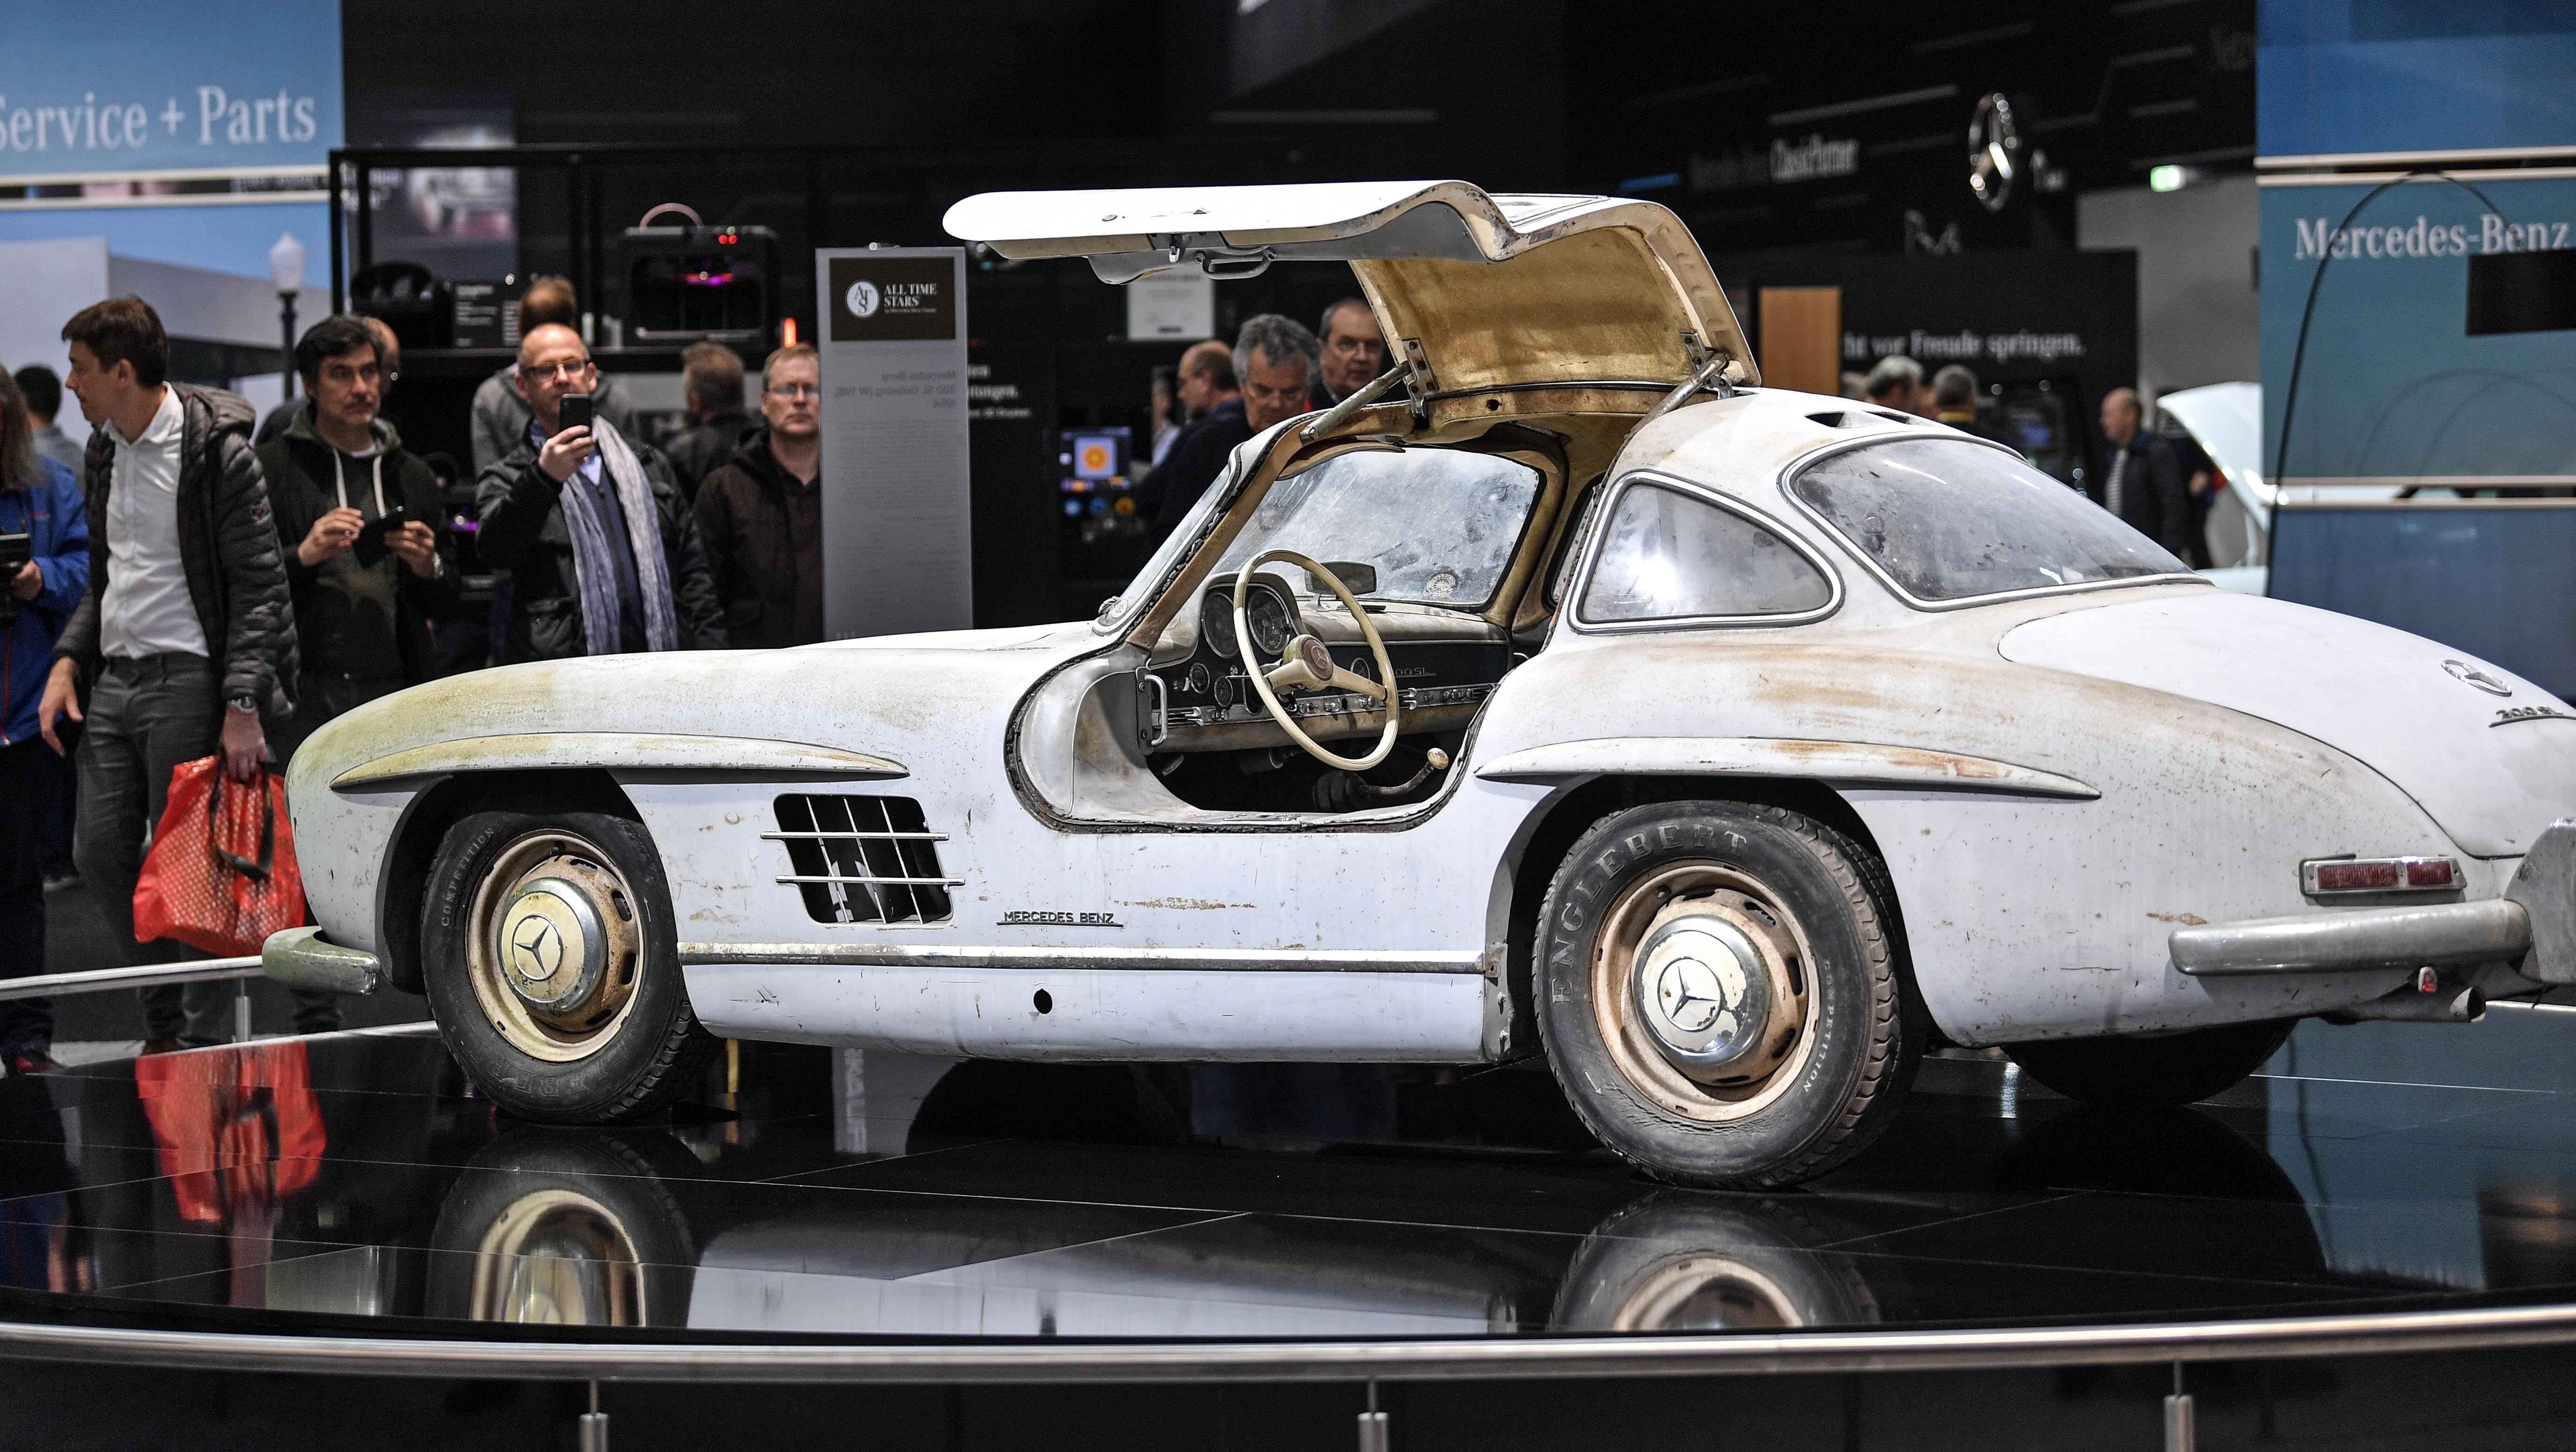 A Mercedes Benz 300 SL Gullwing from 1954 is displayed at the World Show for Vintage, Classic and Prestige Automobiles Techno-Classica in Essen, Germany, Friday, April 12, 2019. The old-timer was found 2018 in a garage in Florida, USA. (AP Photo/Martin Meissner)